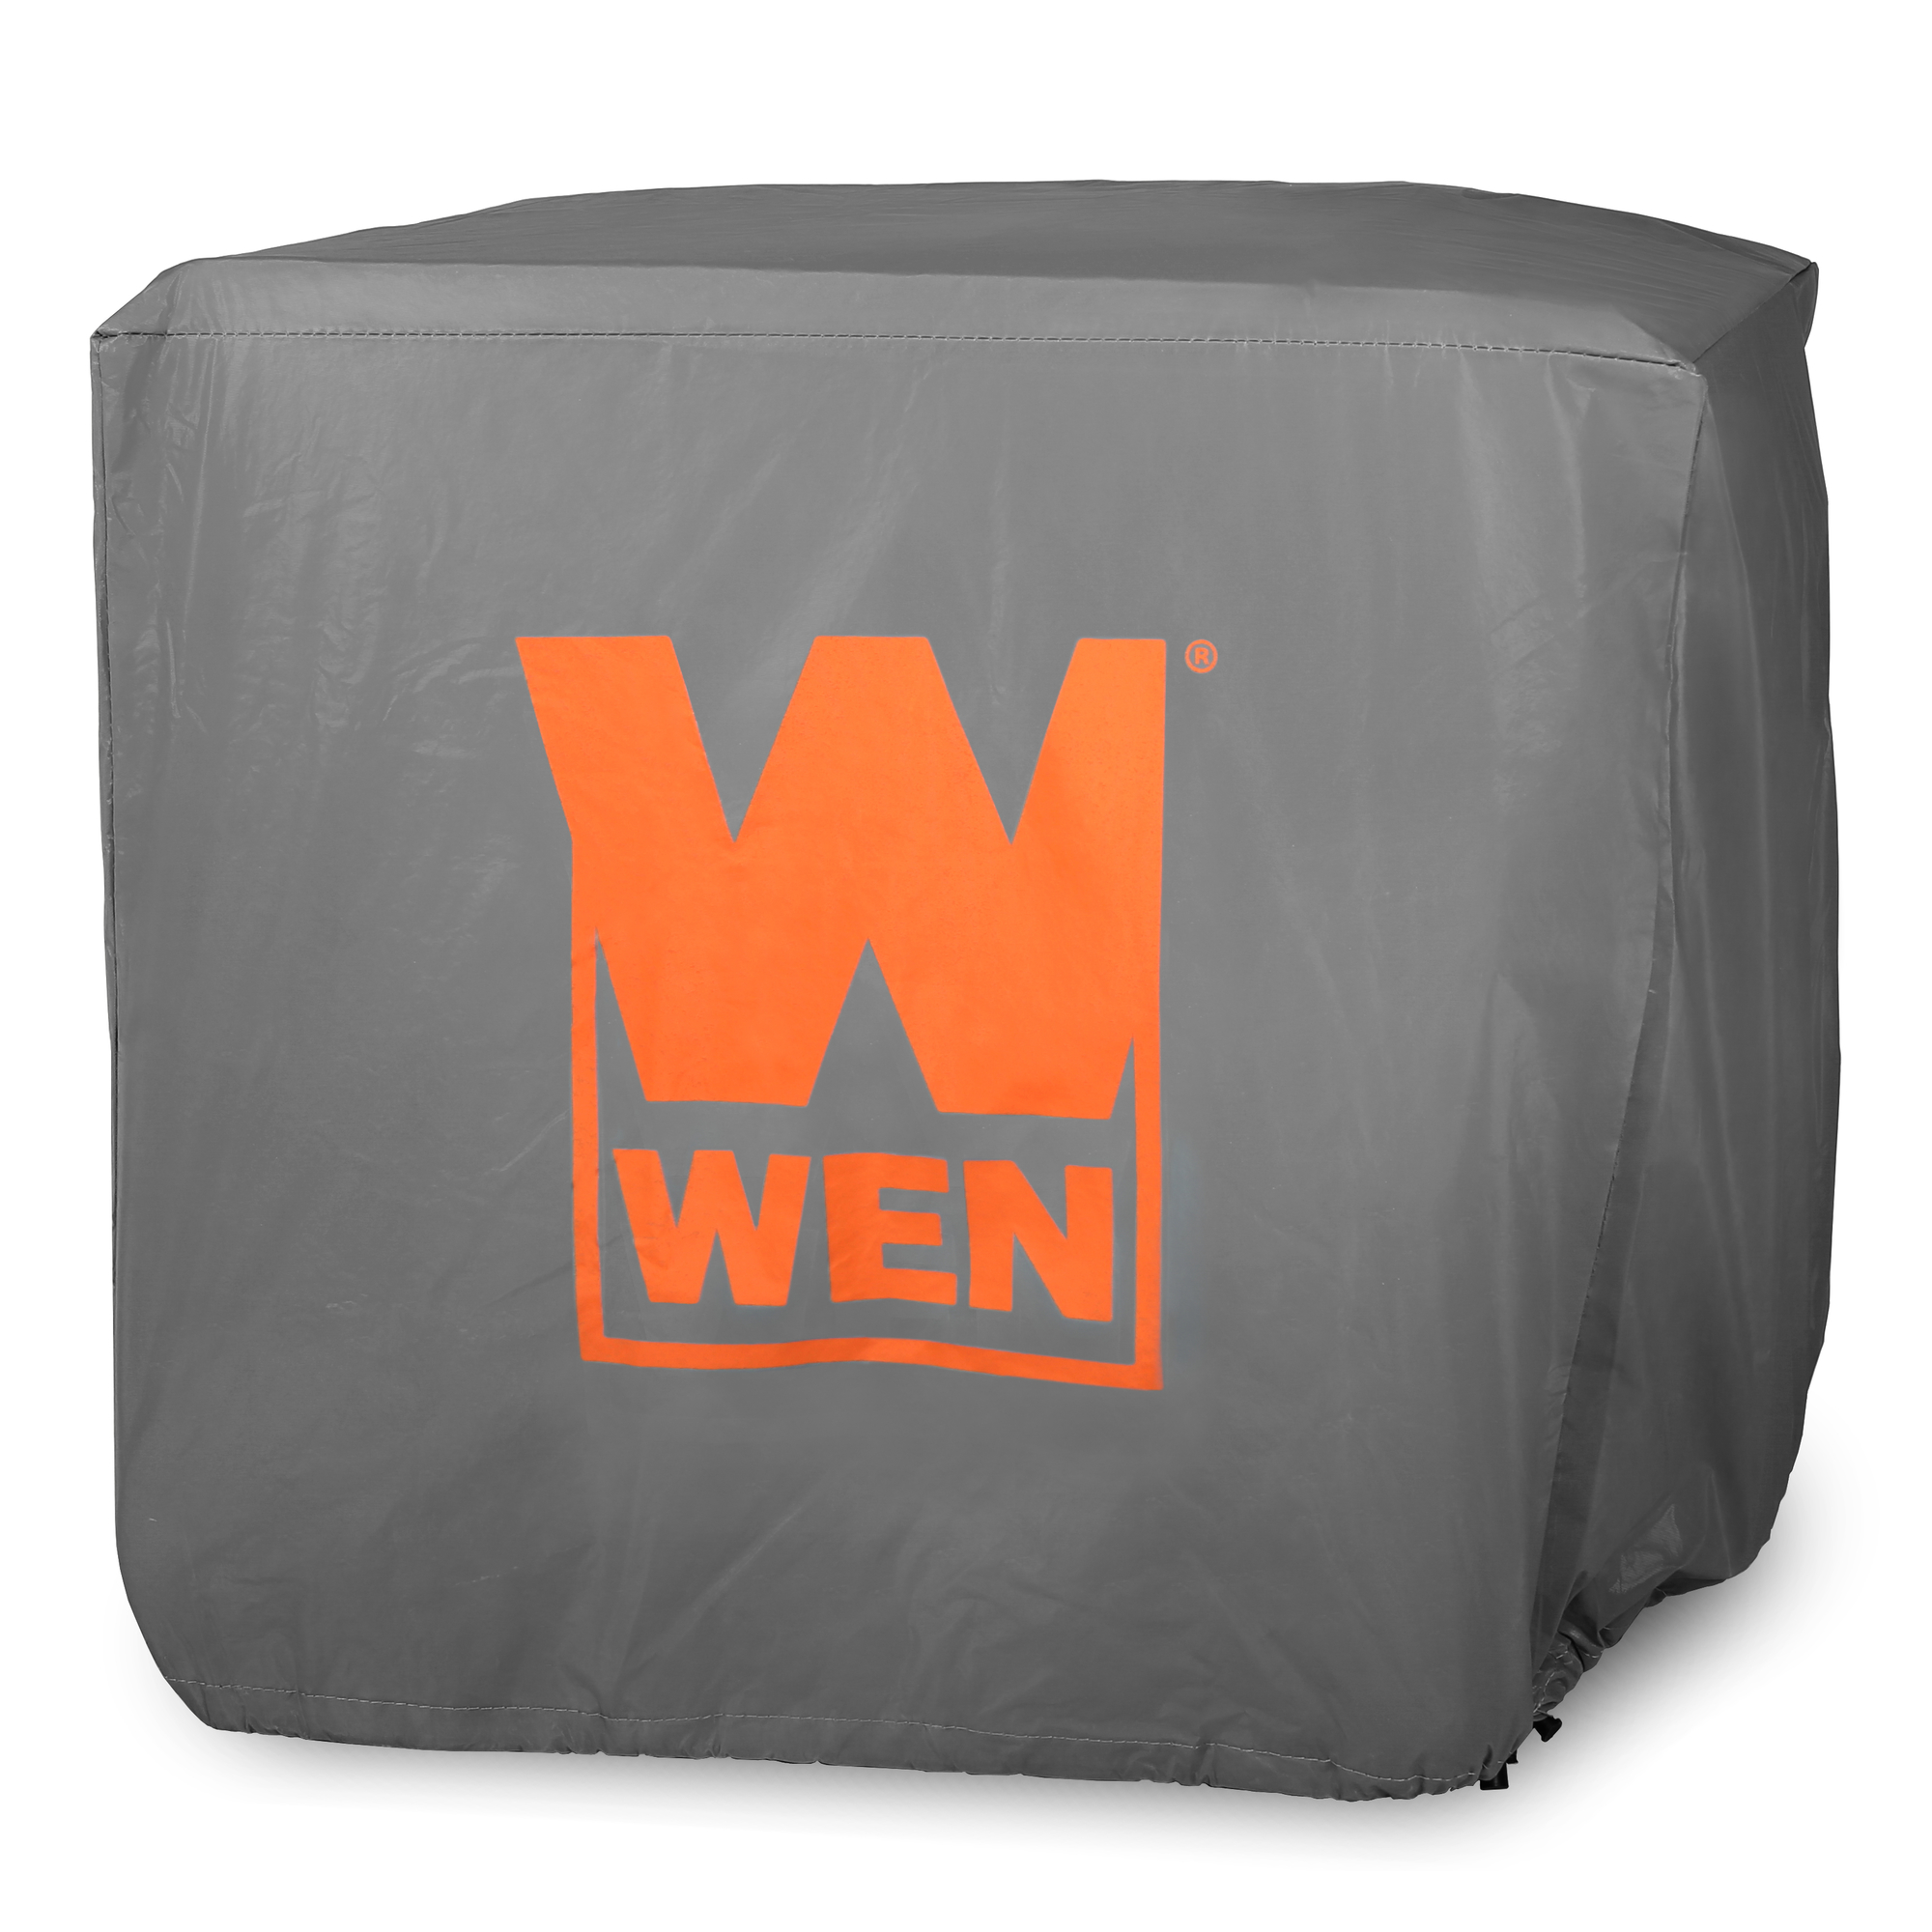 WEN, Weatherproof Generator Cover, Material Vinyl, Closure Type Other, Compatible With Other, Model GNC875